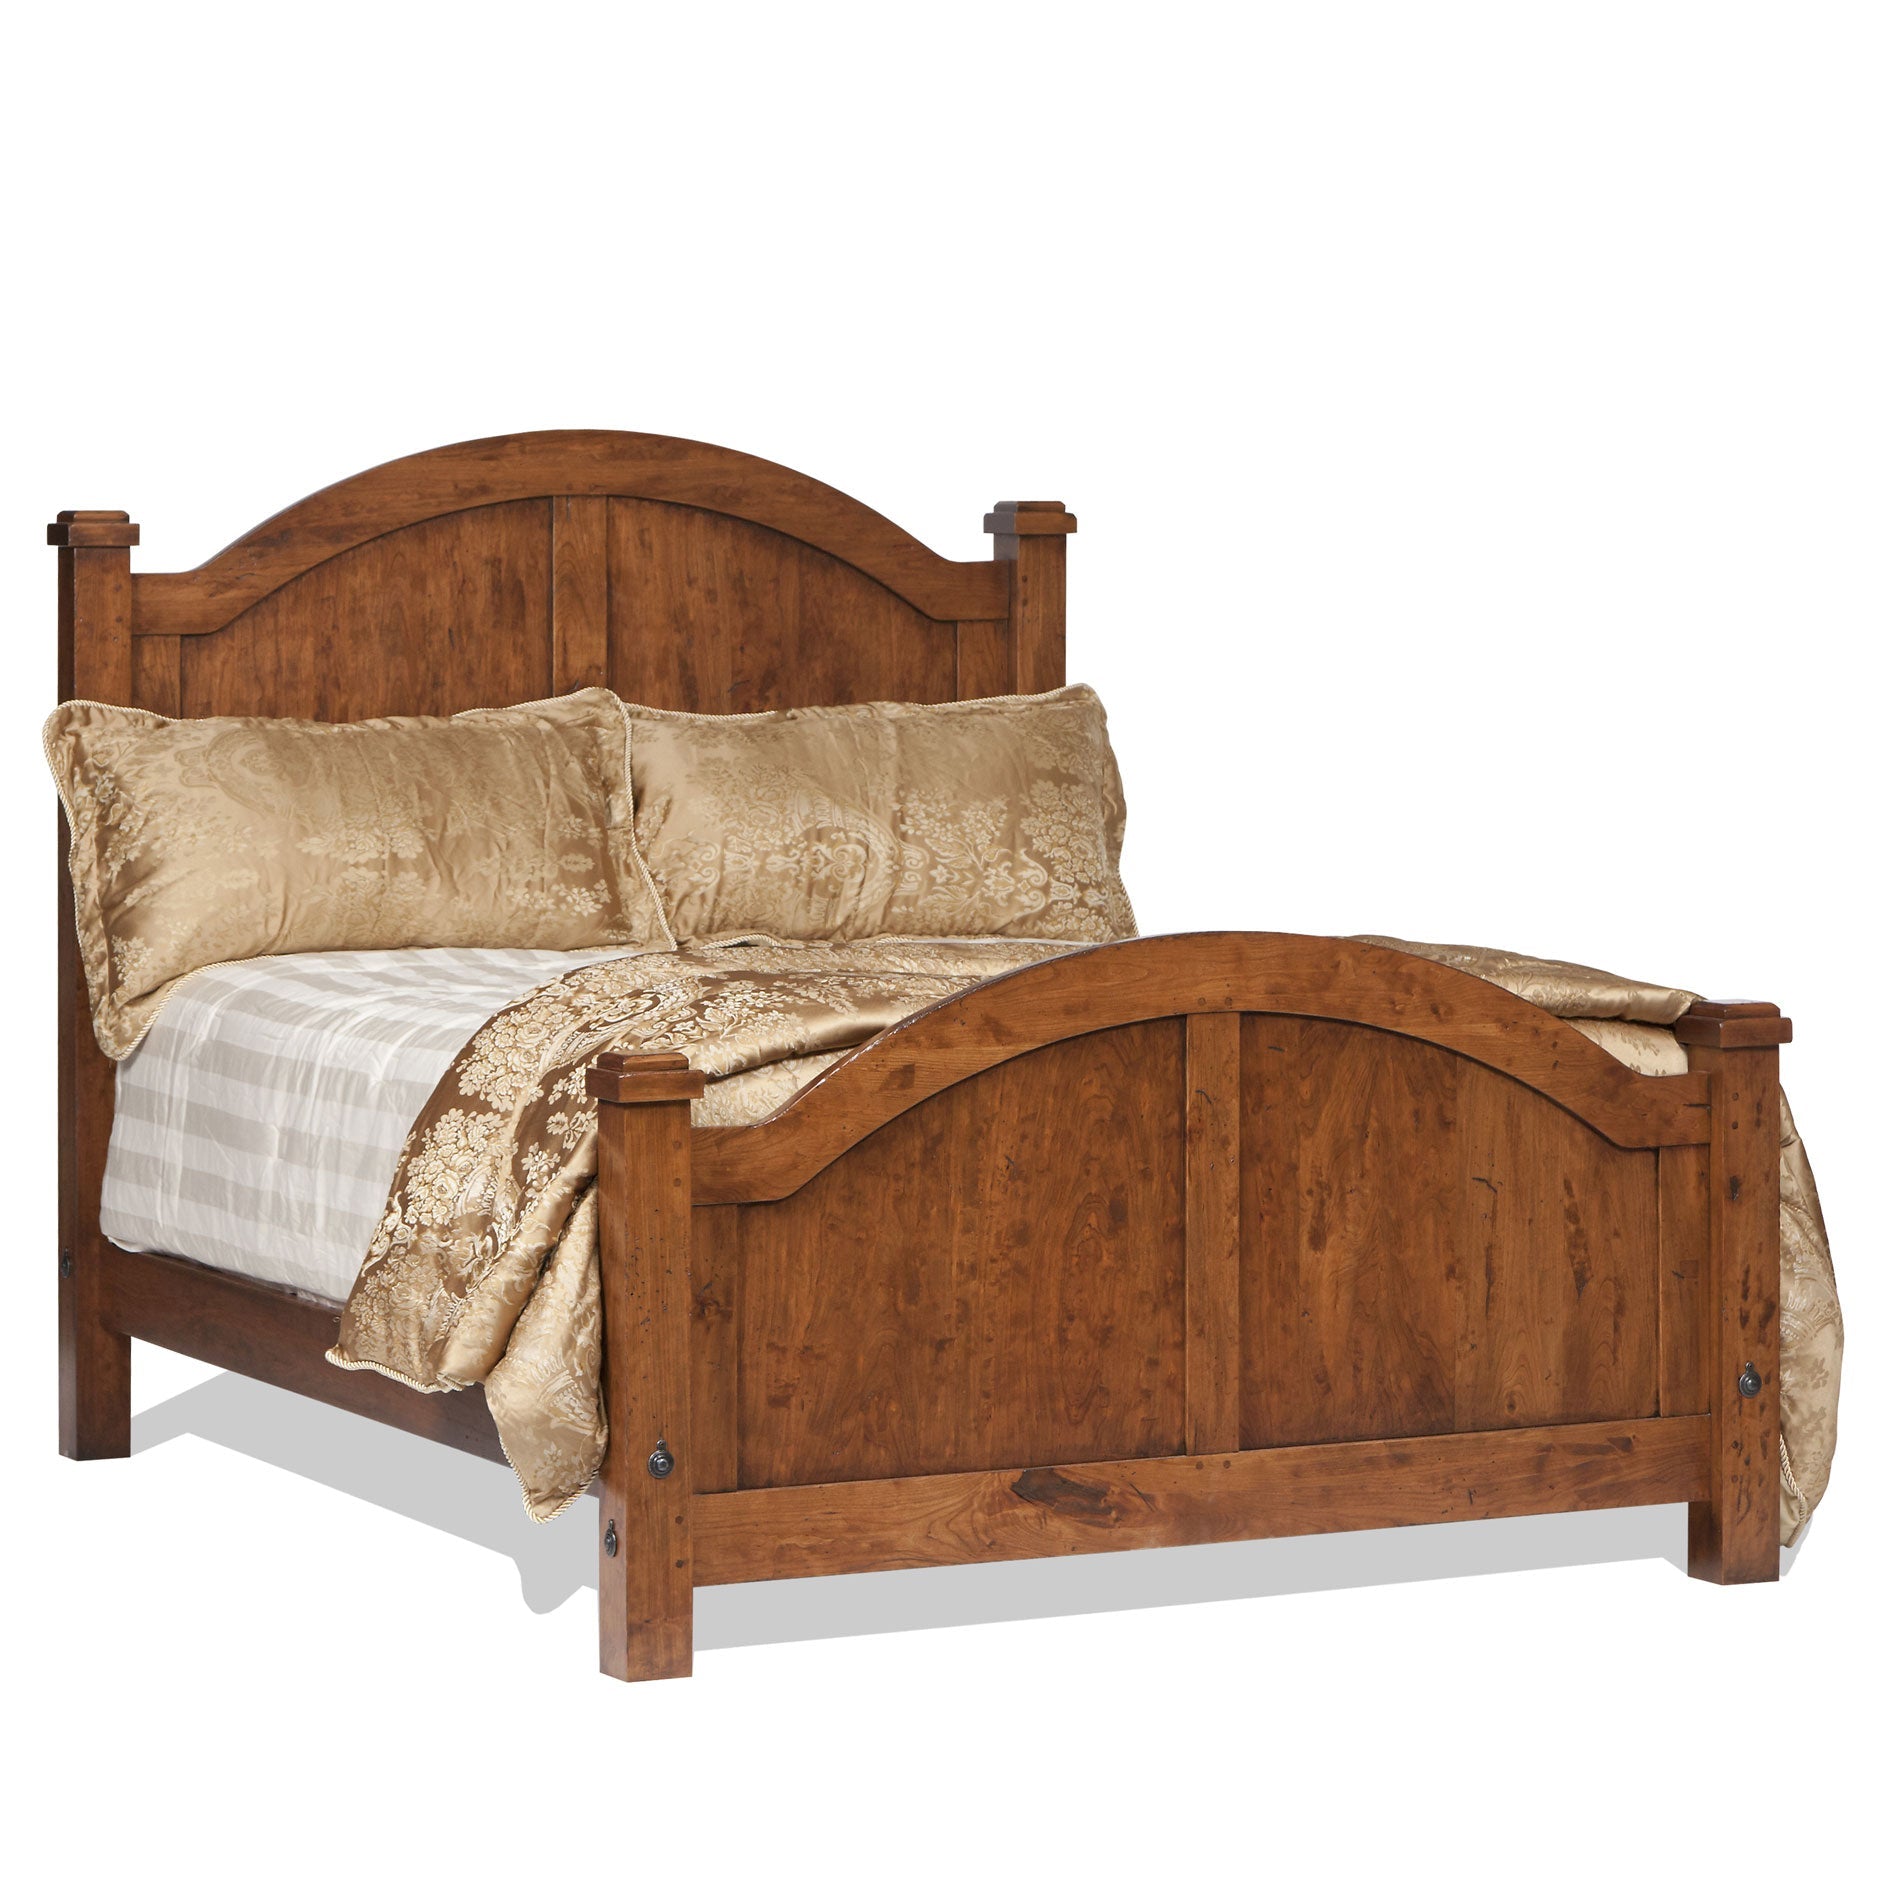 Telluride Arched Panel Bed - snyders.furniture